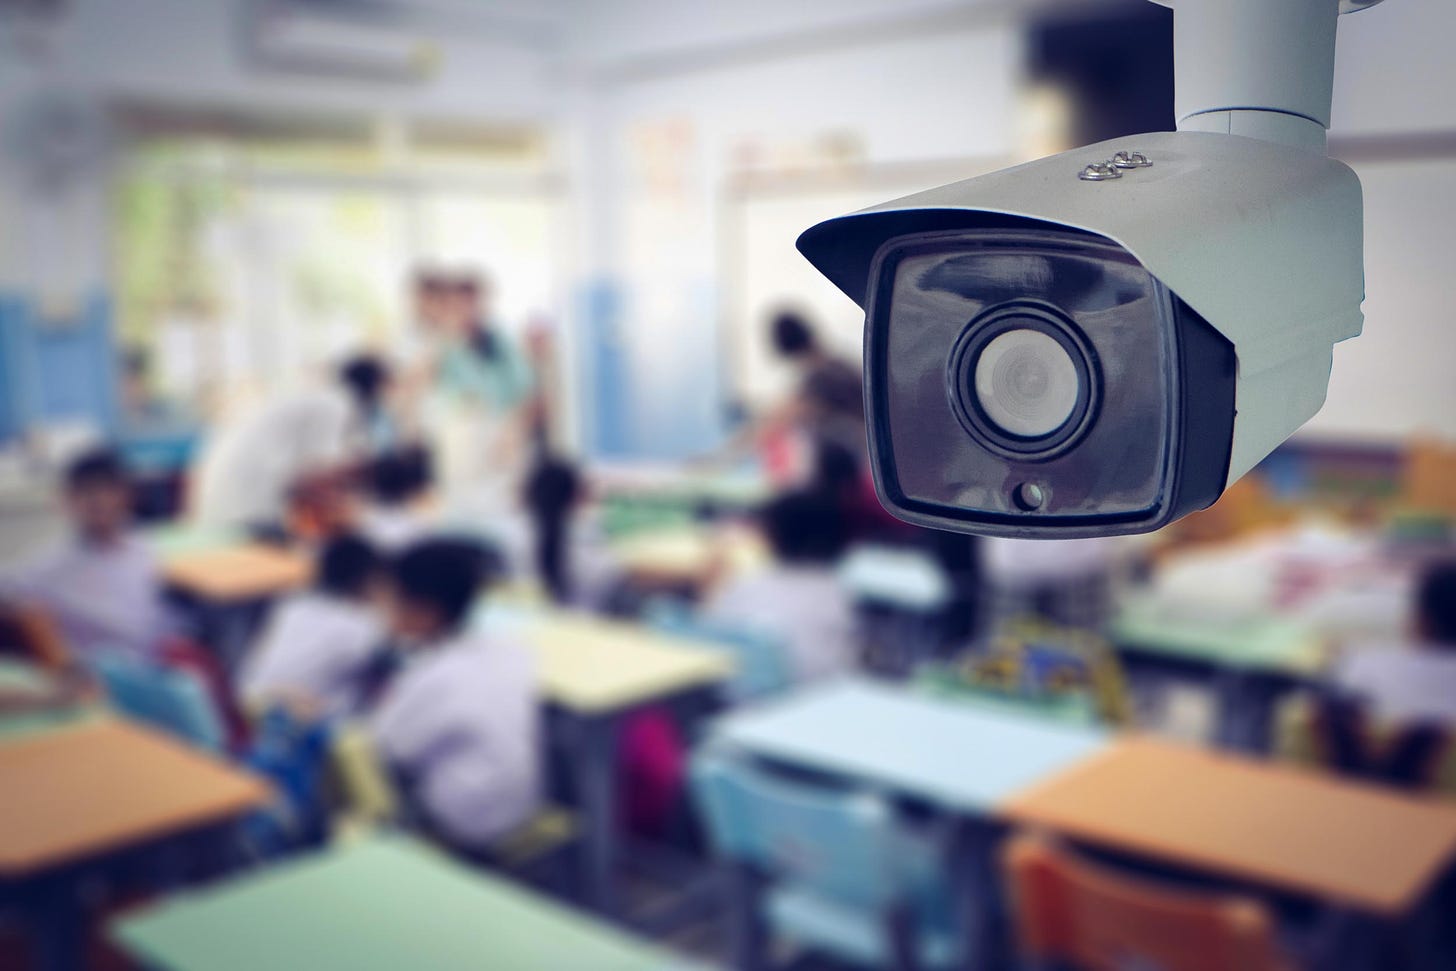 Do Security Cameras in Public Schools Make Students Feel Safer?